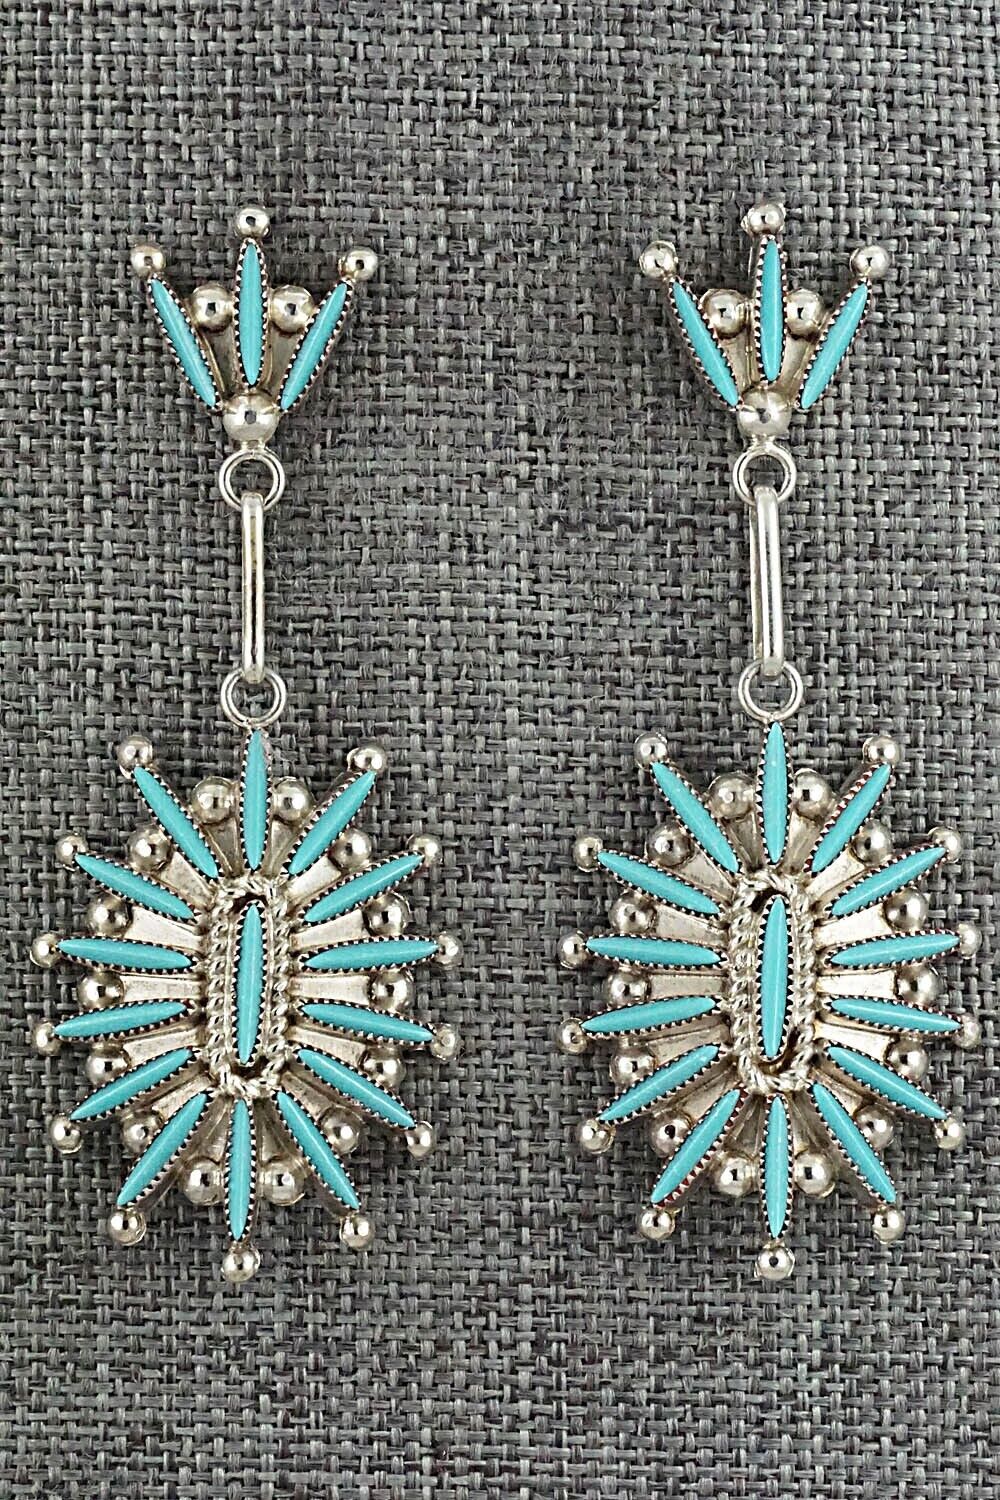 Turquoise & Sterling Silver Earrings - Colin Lalio